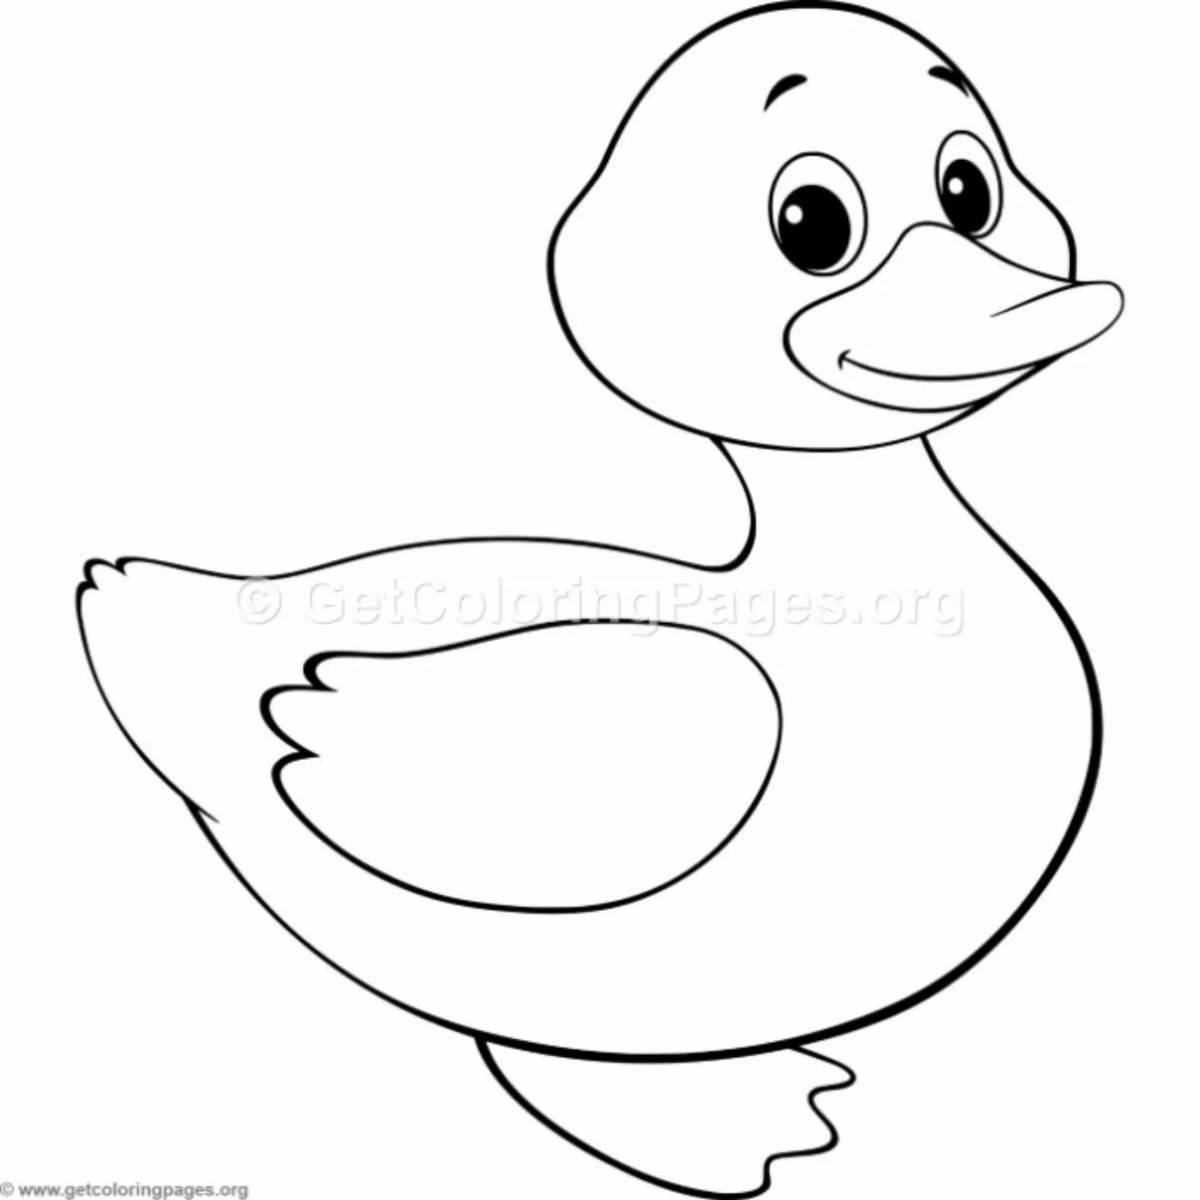 Color-frenzy Dymkovo duck coloring book for children 3-4 years old